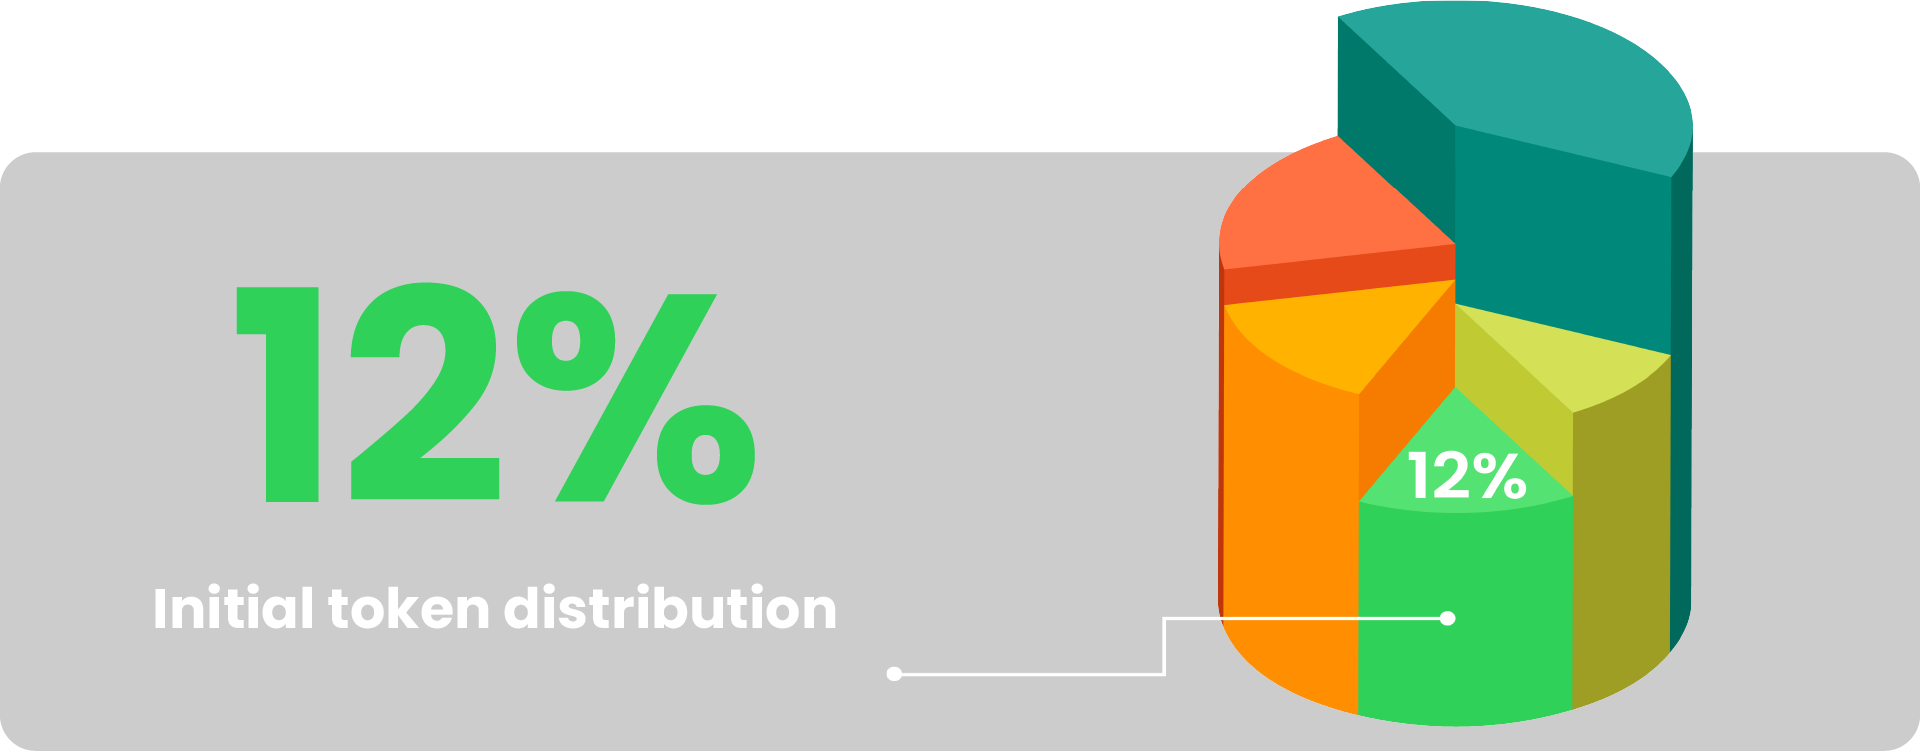 What % of the initial token distribution was allocated to staking rewards?